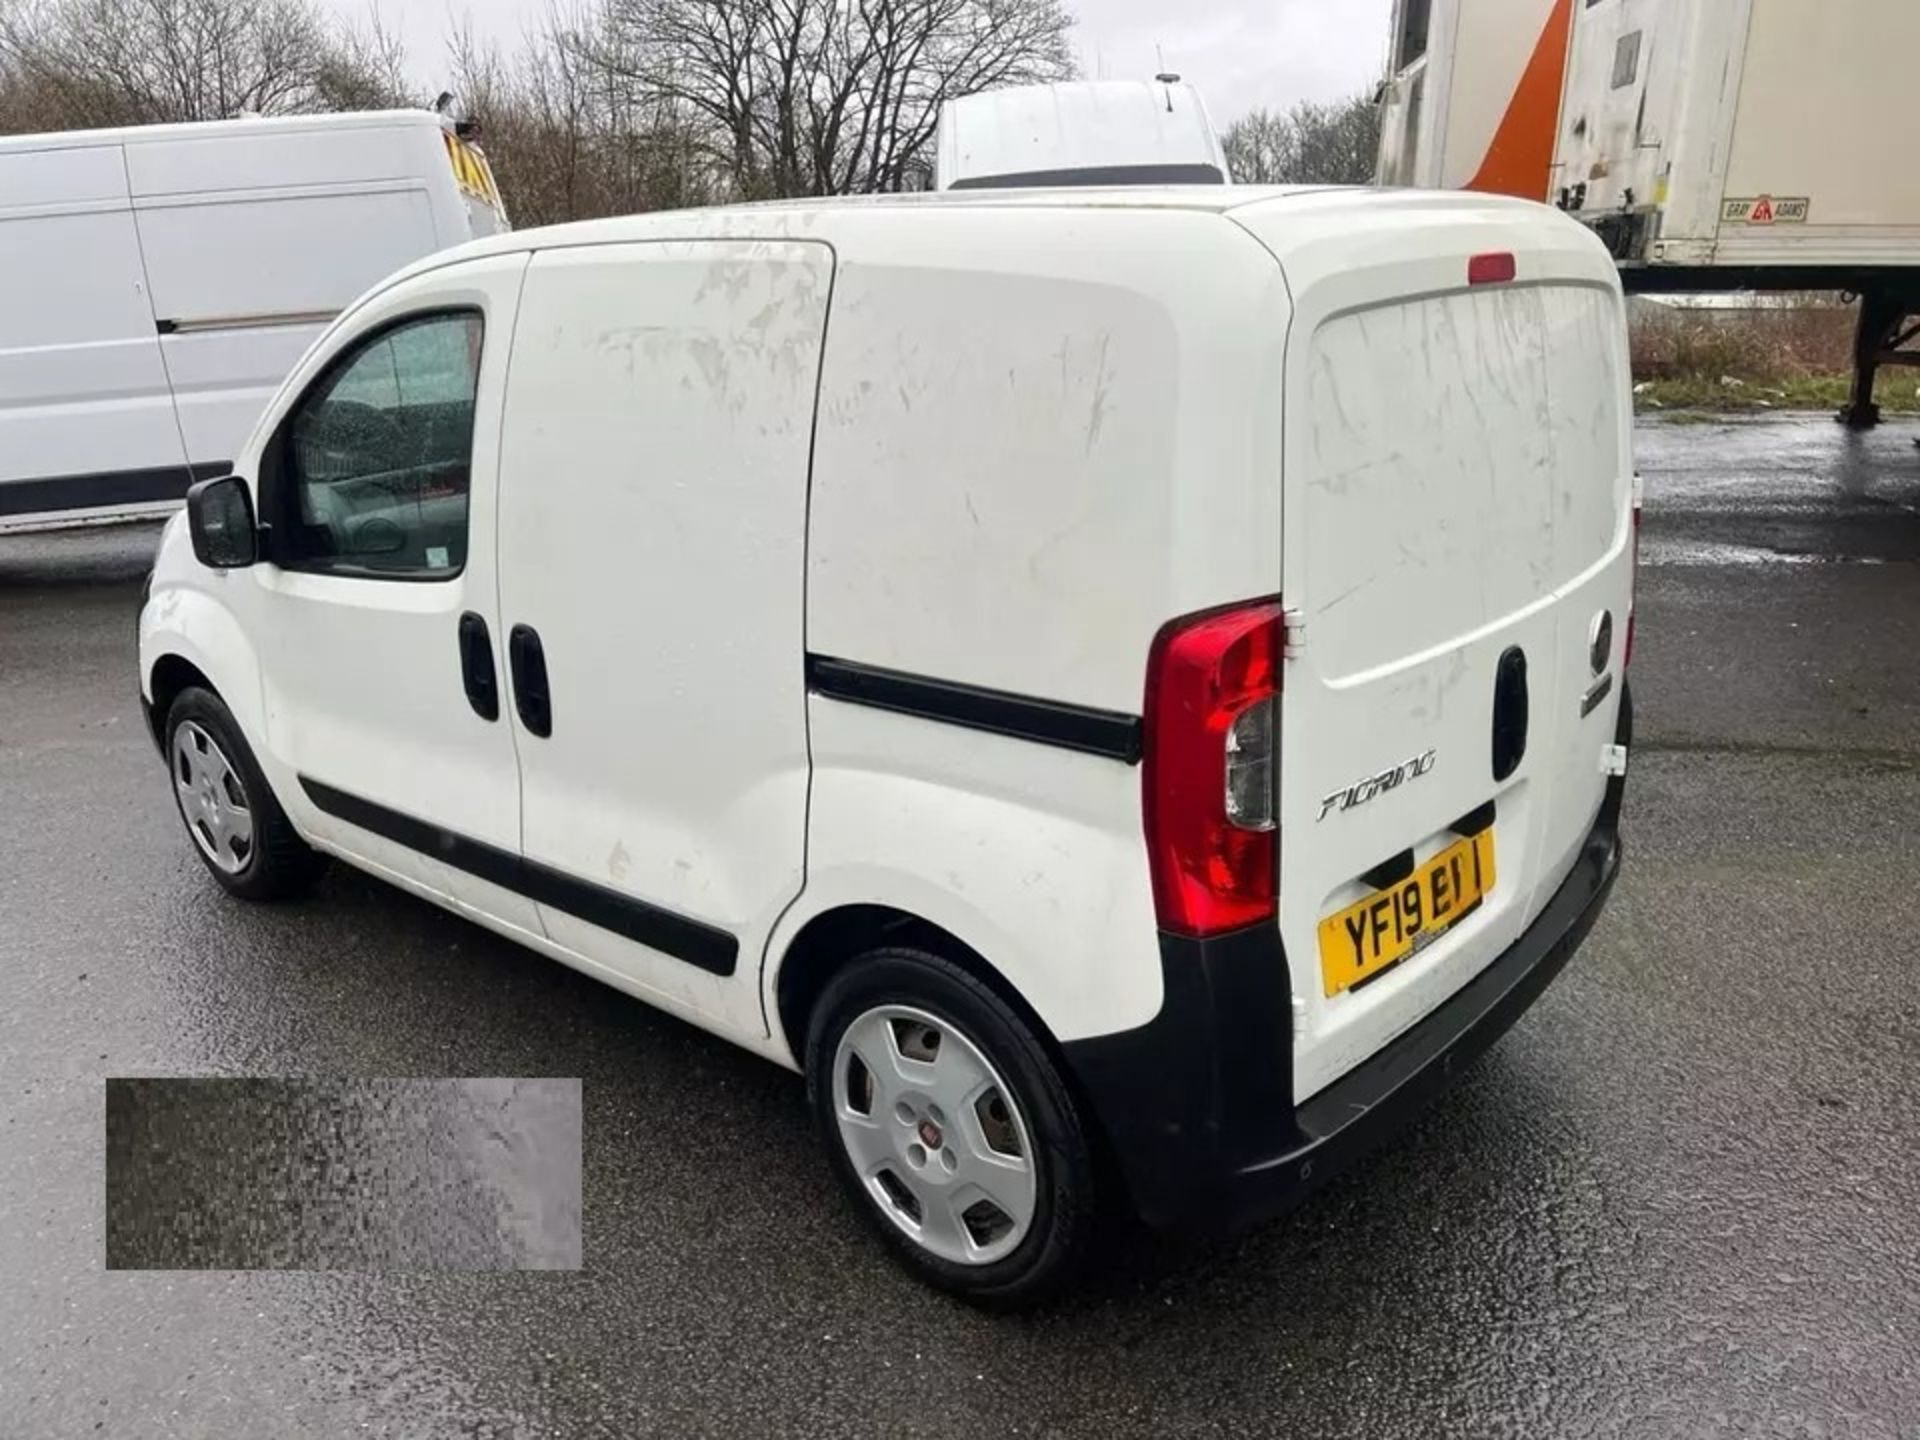 FIAT FIORINO SX 1.3 HDI VAN 2019 - LOADED WITH FEATURES, SOLD FOR SPARES OR REPAIRS - Image 4 of 12